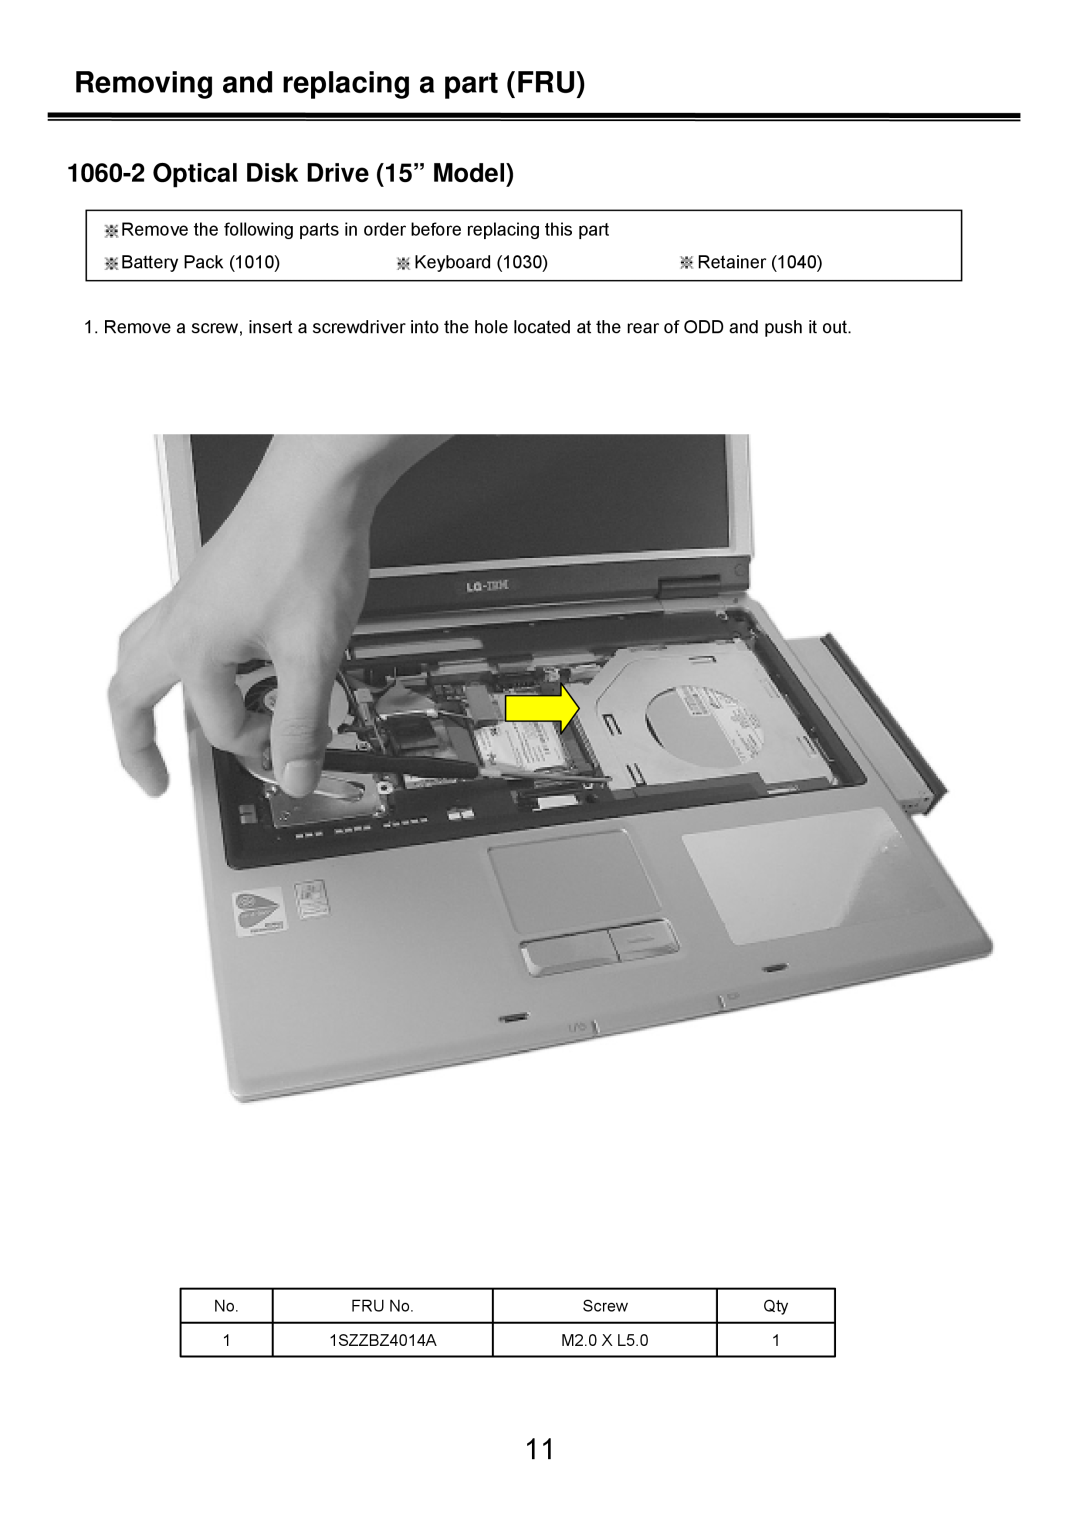 LG Electronics LS50 Optical Disk Drive 15” Model, Removing and replacing a part FRU, Battery Pack, Keyboard, Retainer 